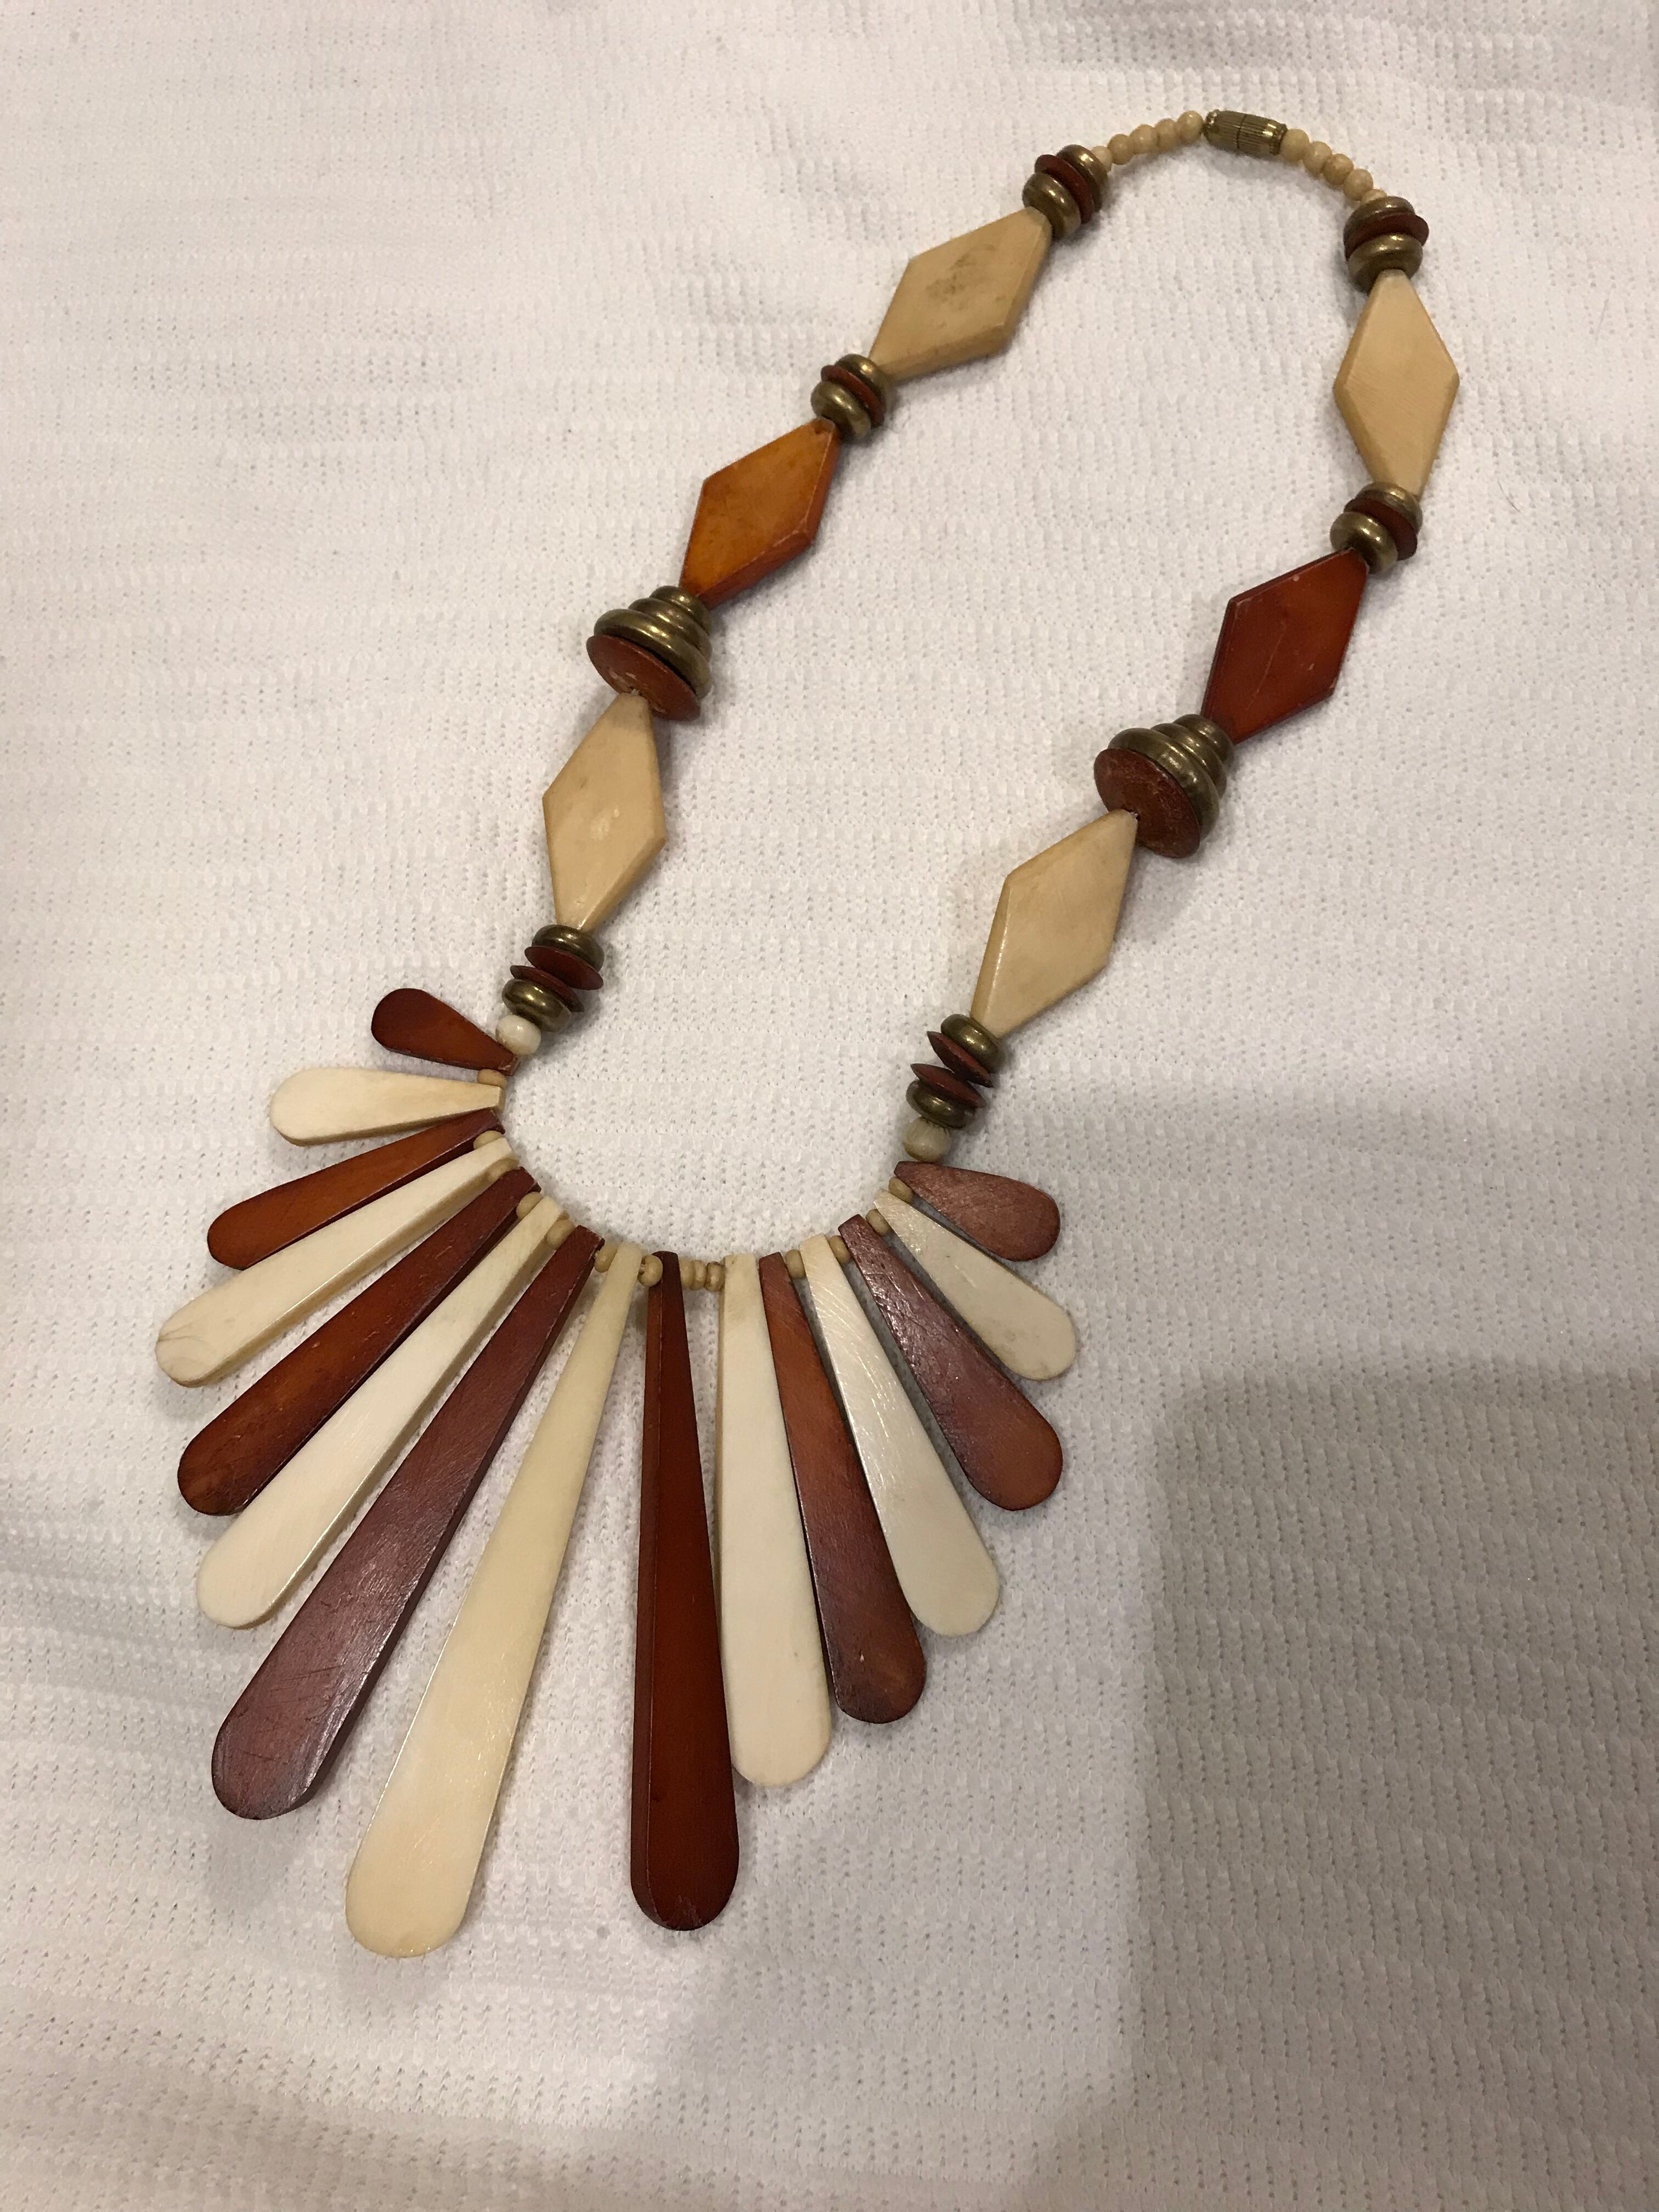 70s brown Necklace ( ヴィンテージ ブラウン ネックレス )